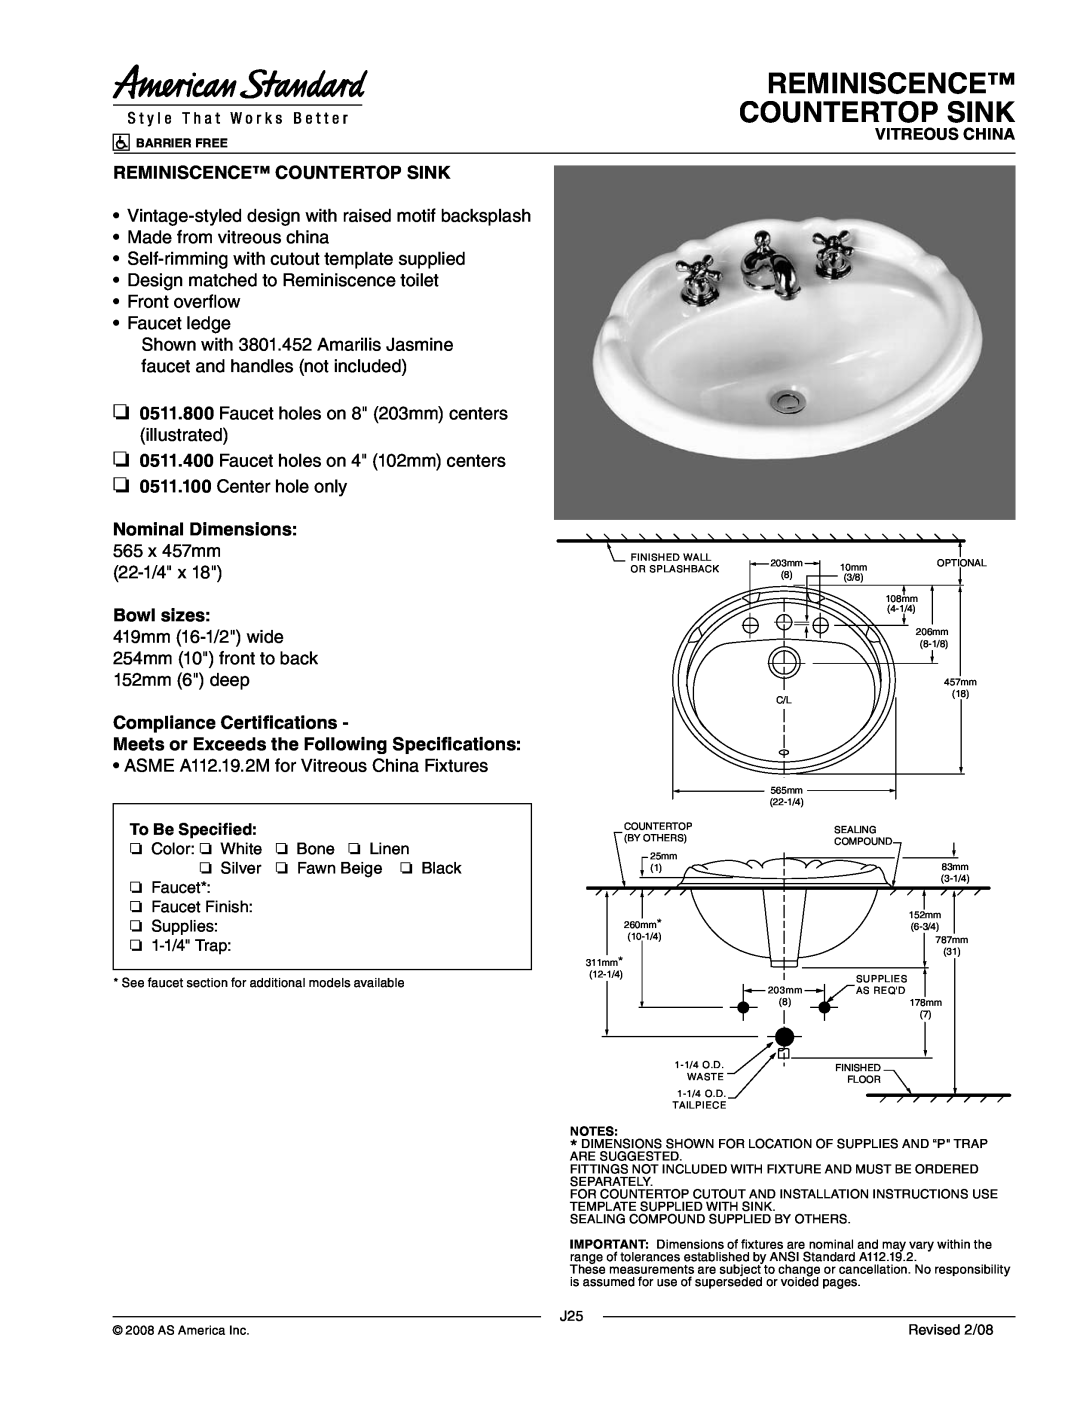 American Standard 0511.100, 0511.400 dimensions Reminiscence Countertop Sink, Nominal Dimensions 565 x 457mm, Bowl sizes 